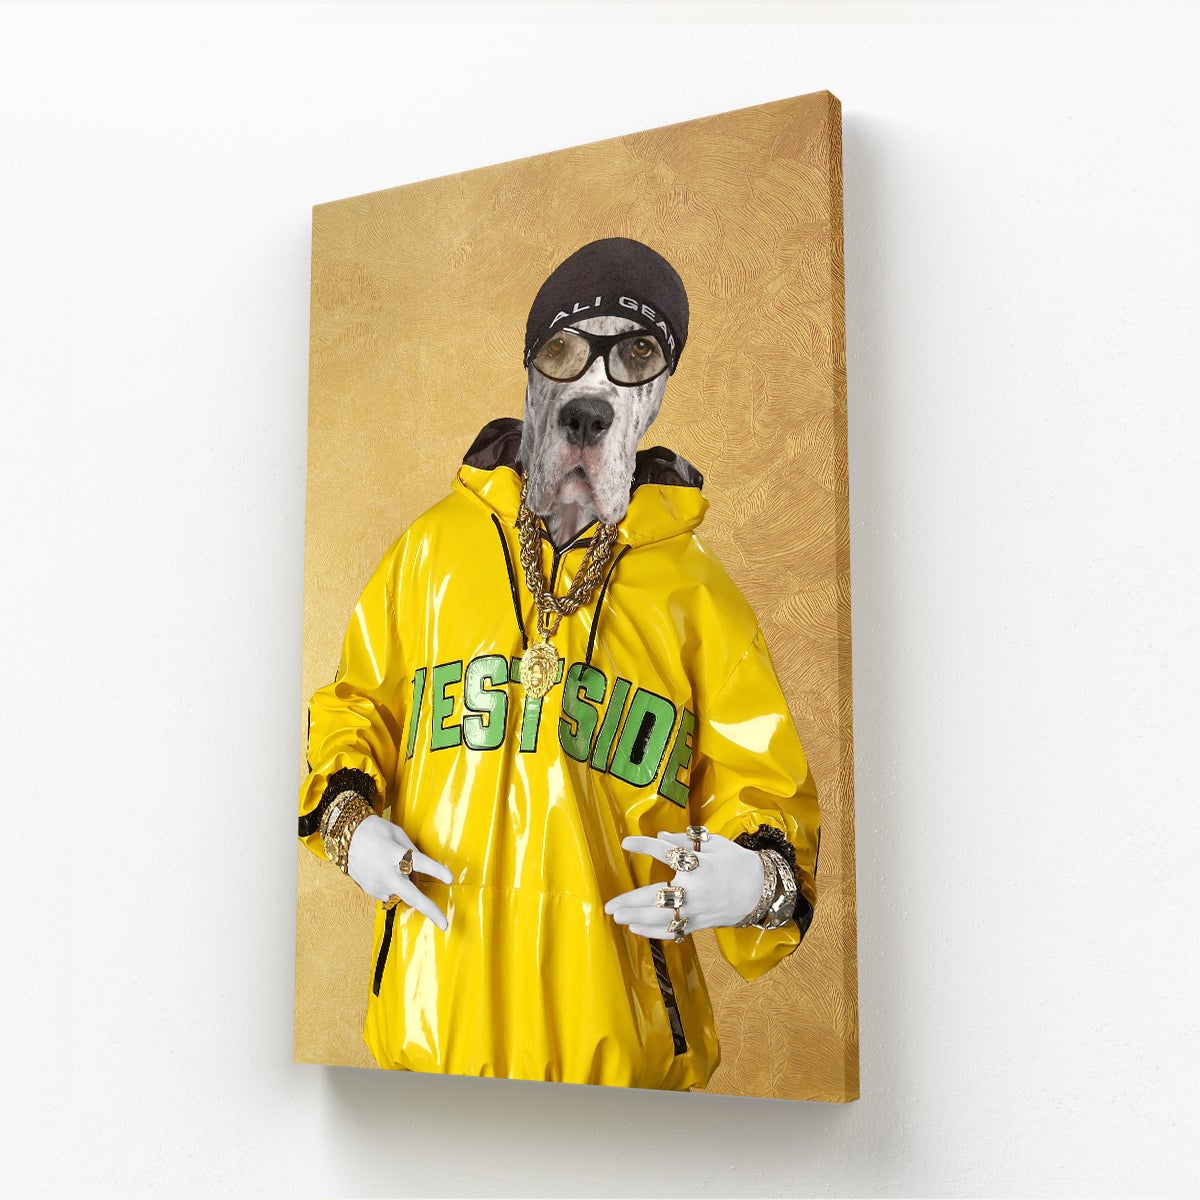 Ali G: Custom Pet Canvas - Paw & Glory - #pet portraits# - #dog portraits# - #pet portraits uk#paw and glory, custom pet portrait canvas,dog pictures on canvas, dog wall art canvas, pet photo canvas, personalized dog and owner canvas uk, the pet canvas